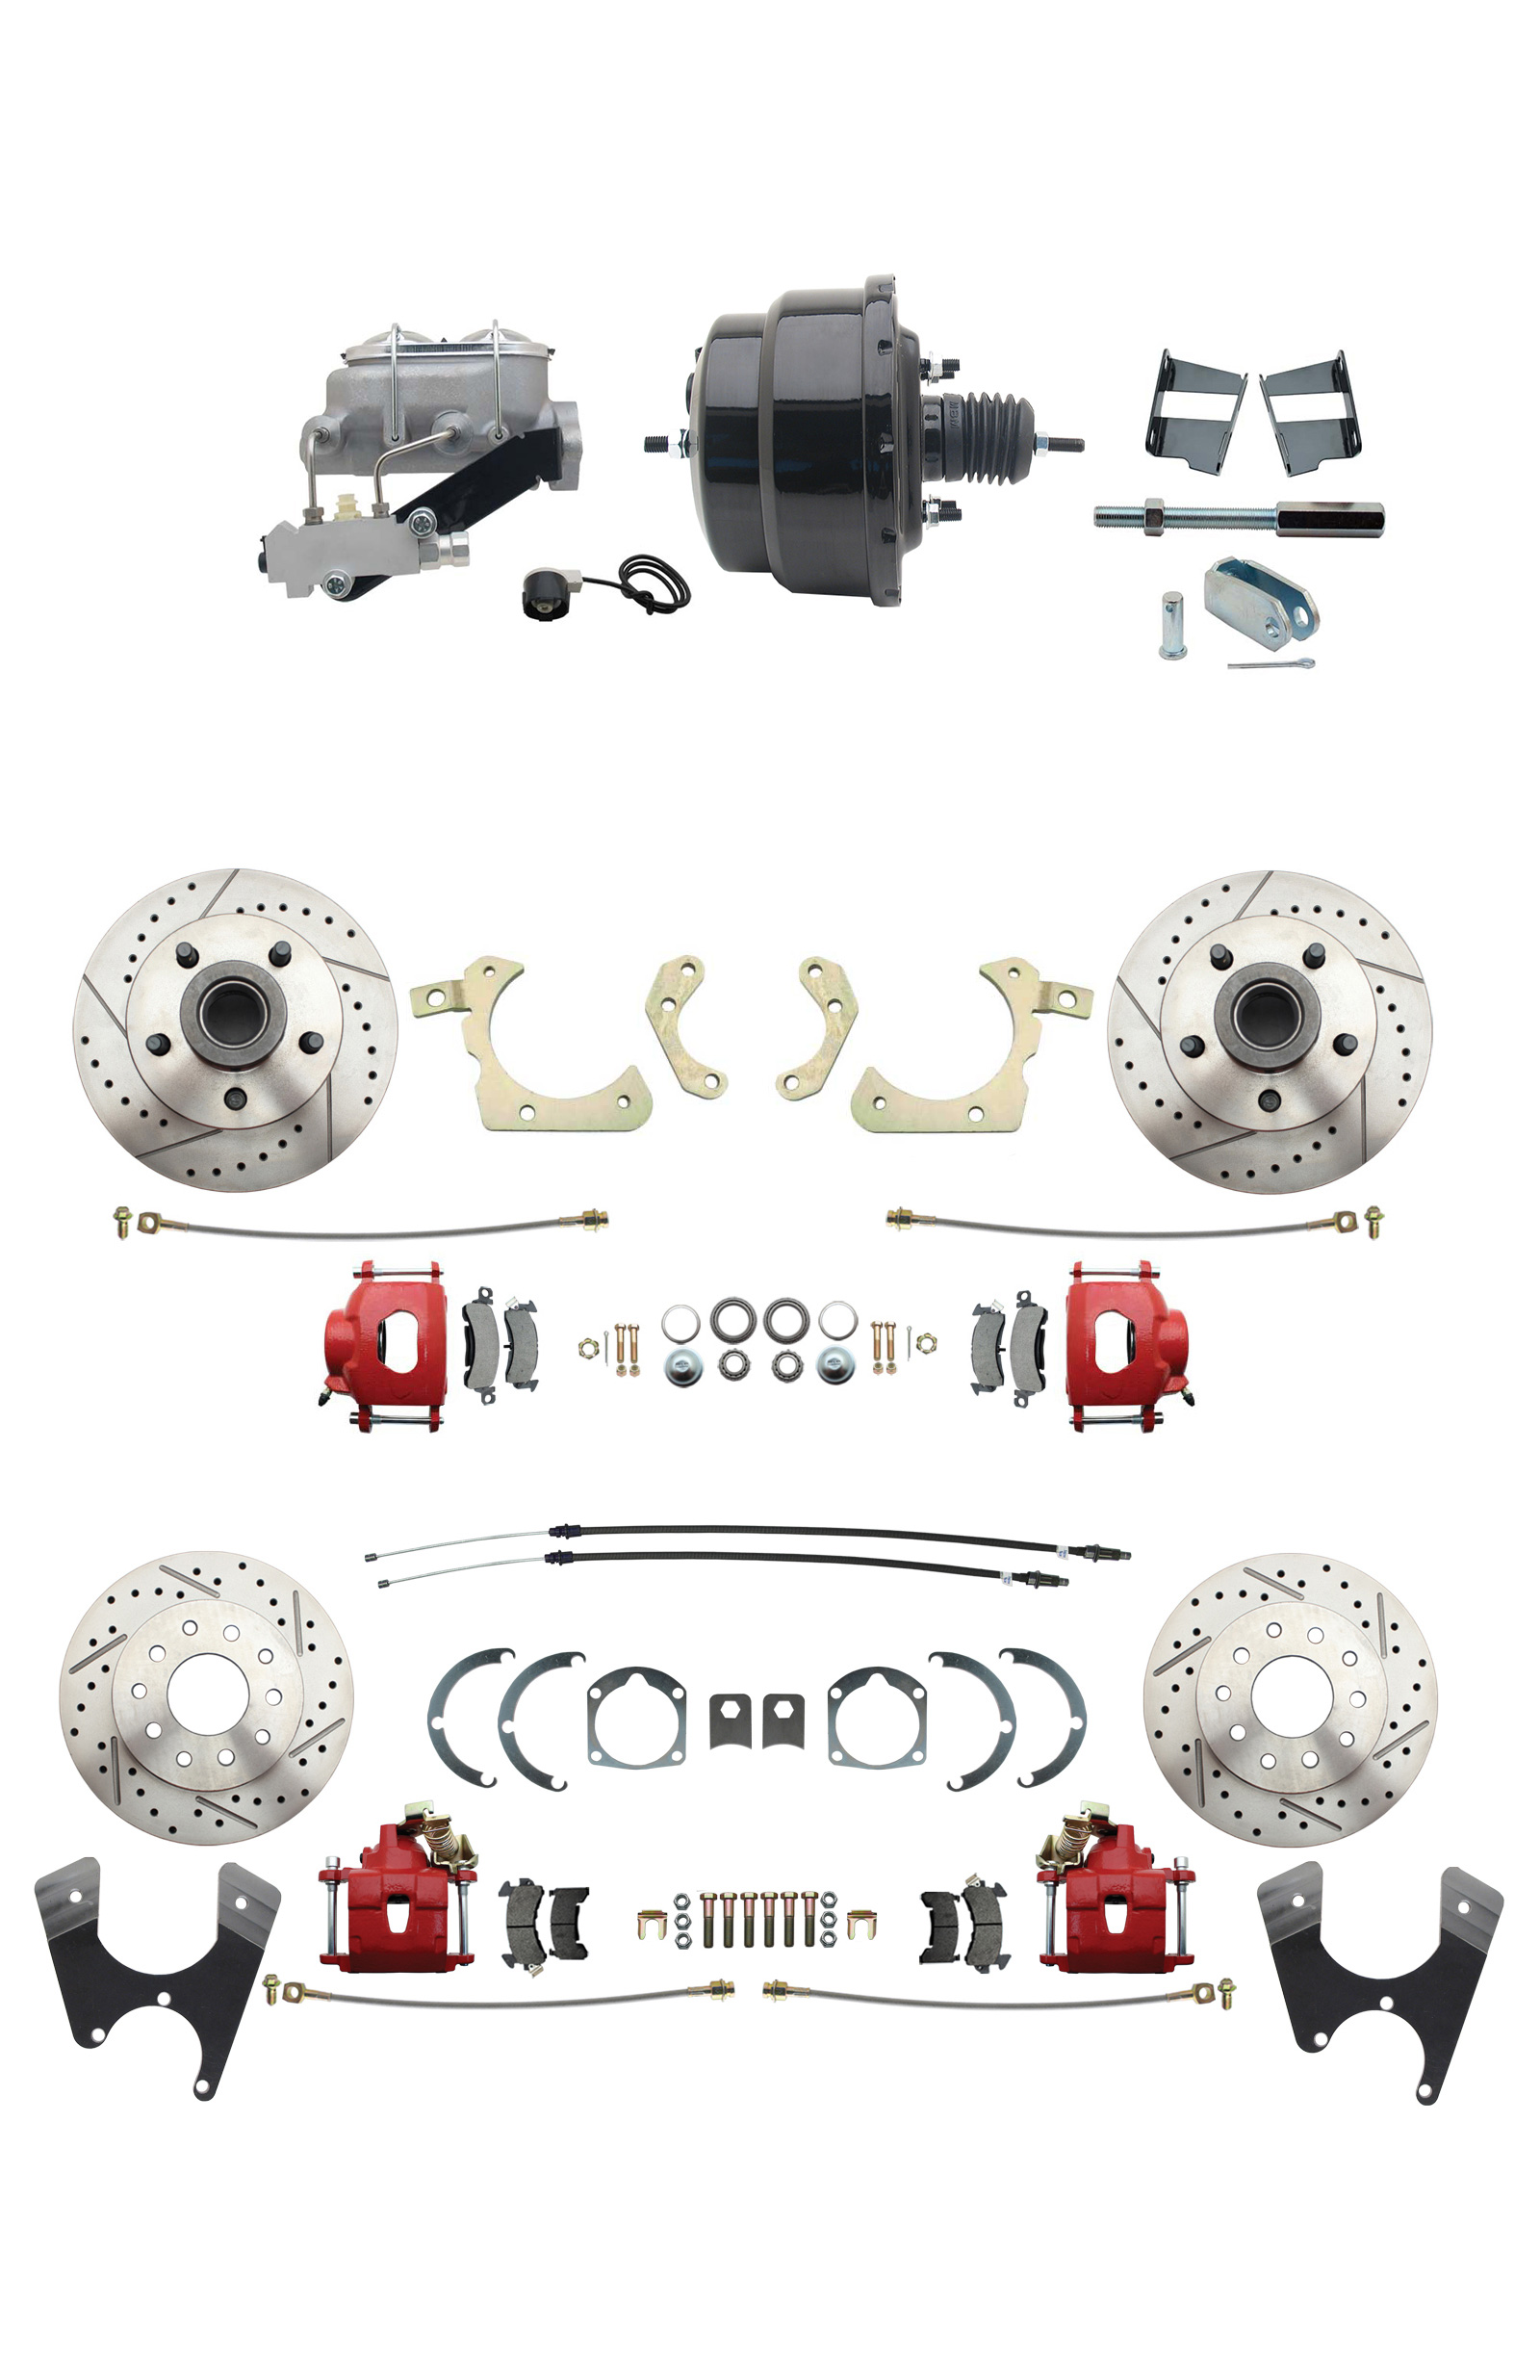 1959-1964 GM Full Size Front & Rear Power Disc Brake Kit Red Powder Coated Calipers Drilled/Slotted Rotors (Impala, Bel Air, Biscayne) & 8 Dual Powder Coated Black Booster Conversion Kit W/ Aluminum Master Cylinder Left